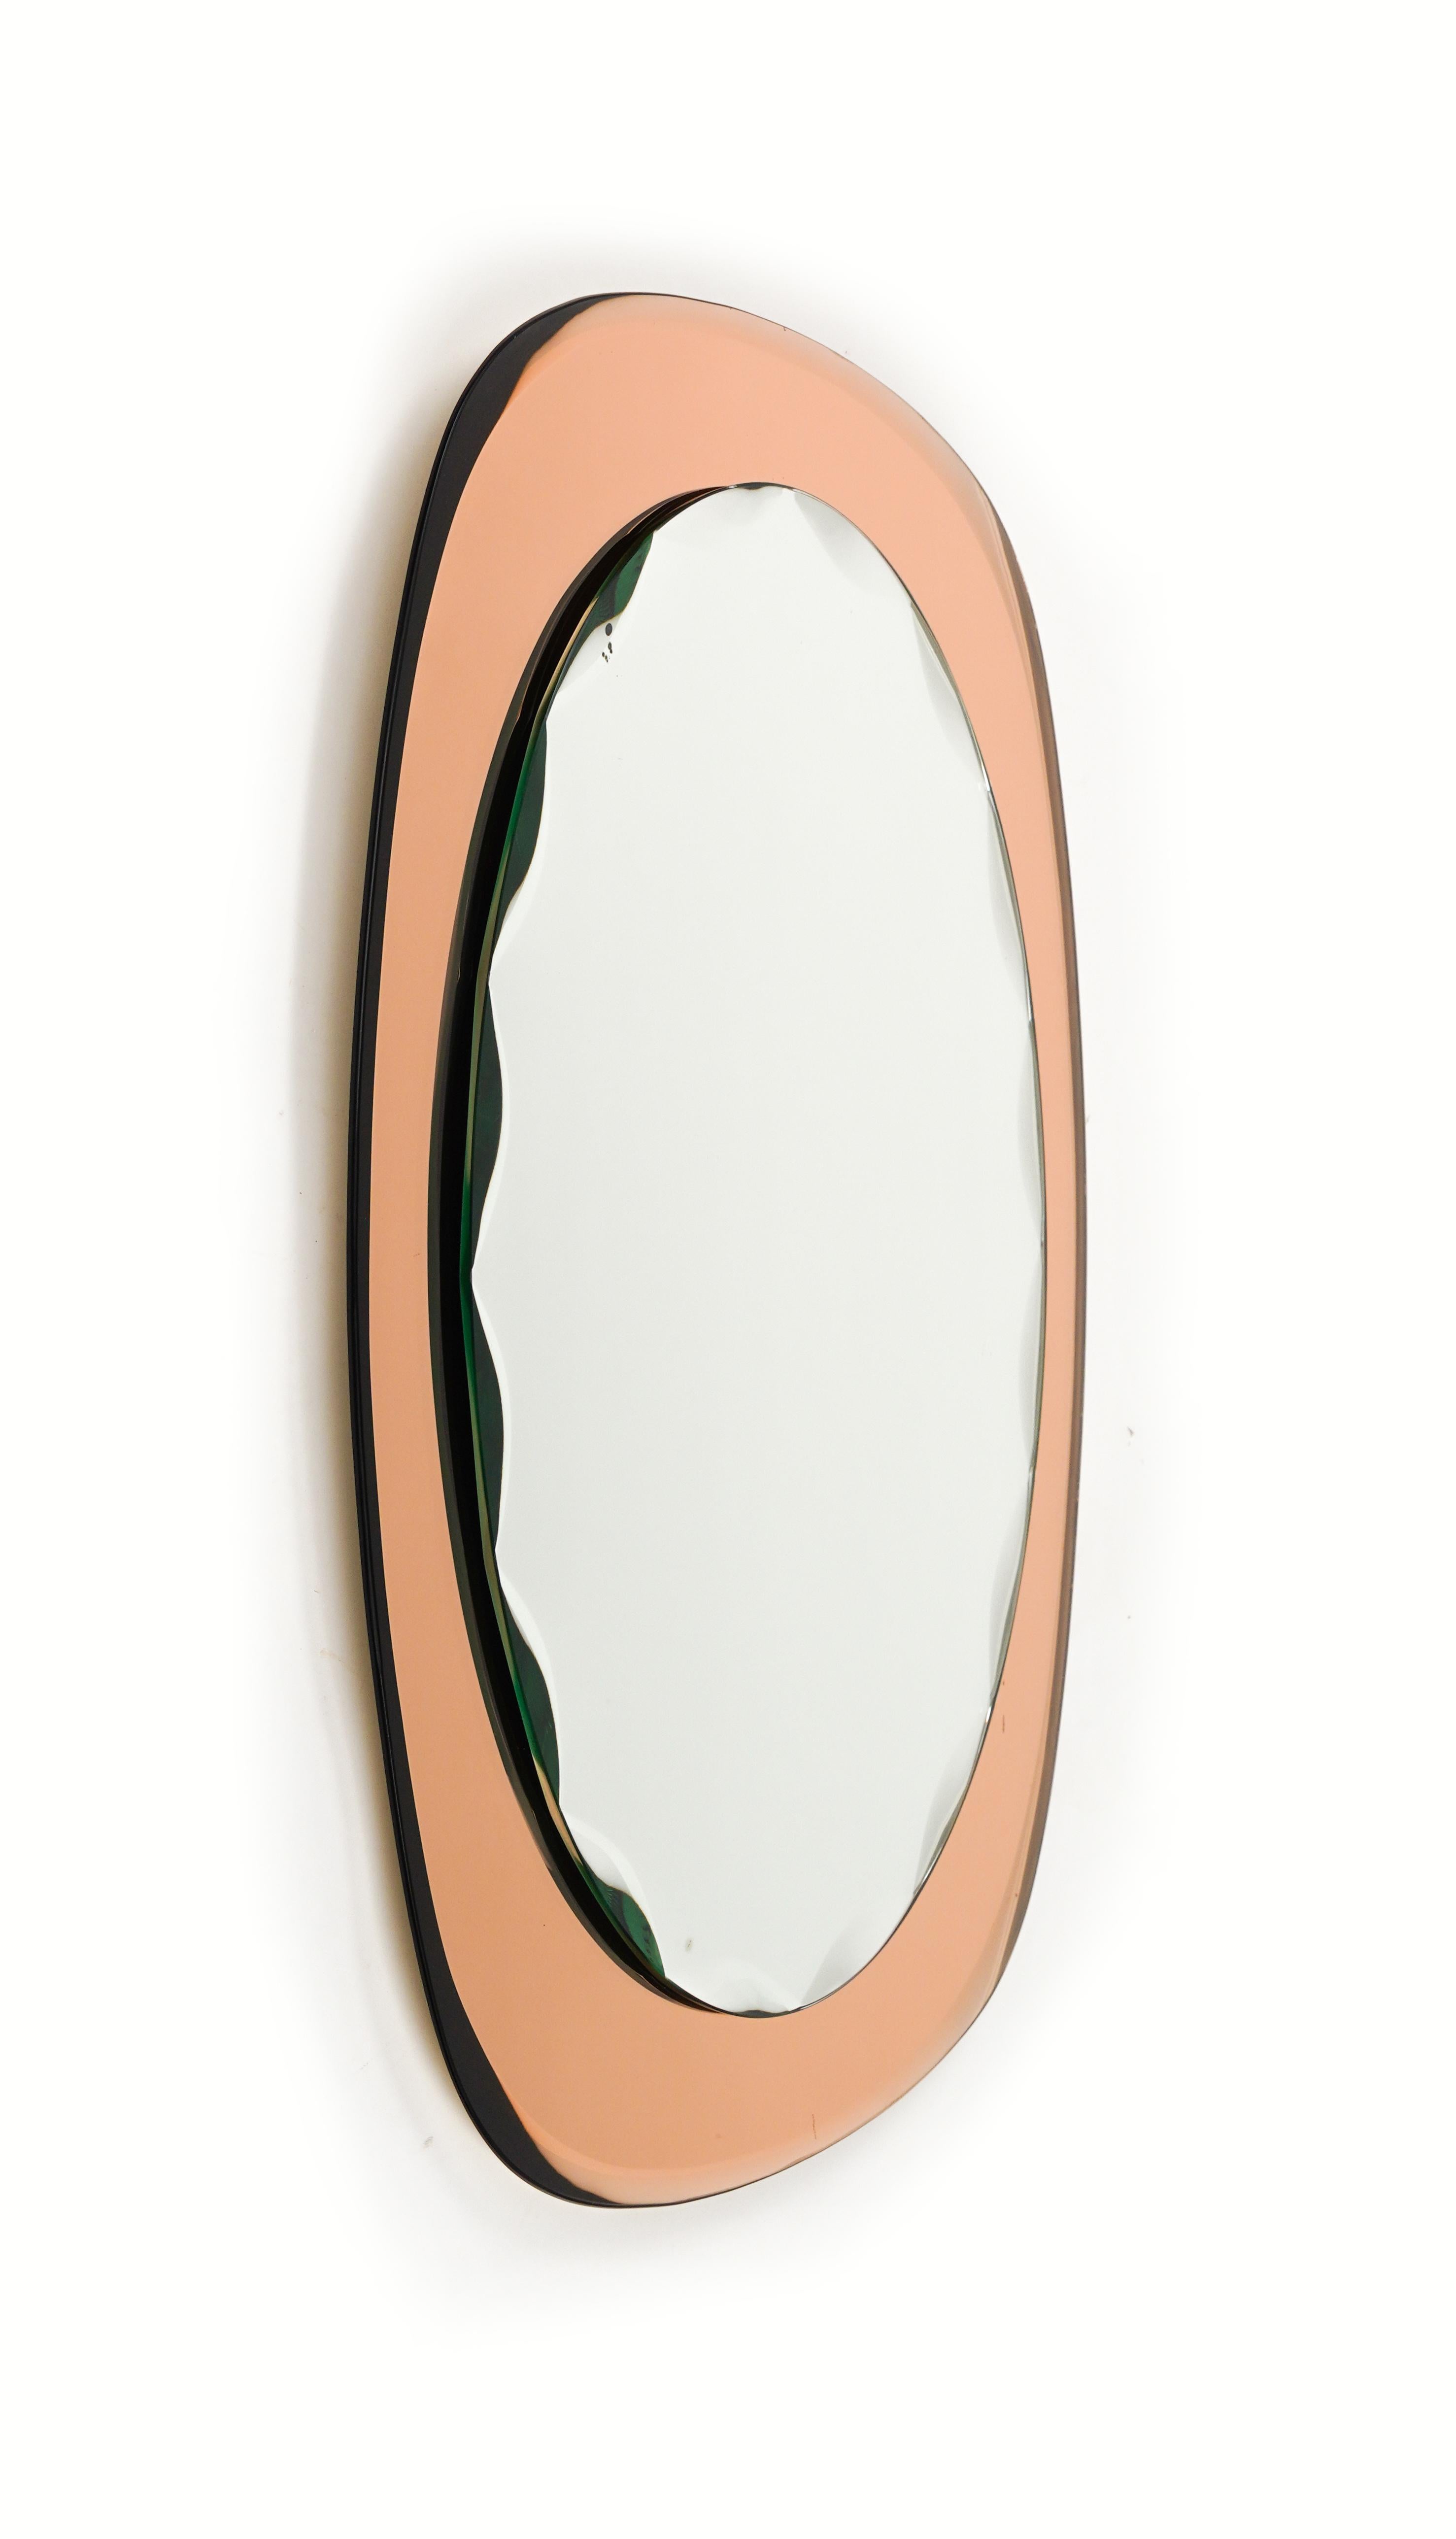 
Midcentury amazing scalloped oval wall mirror on rose gold mirror frame attributed to Cristal Arte.

Made in Italy in the 1960s.

The mirror is very well-made, heavy and in good vintage condition. 
